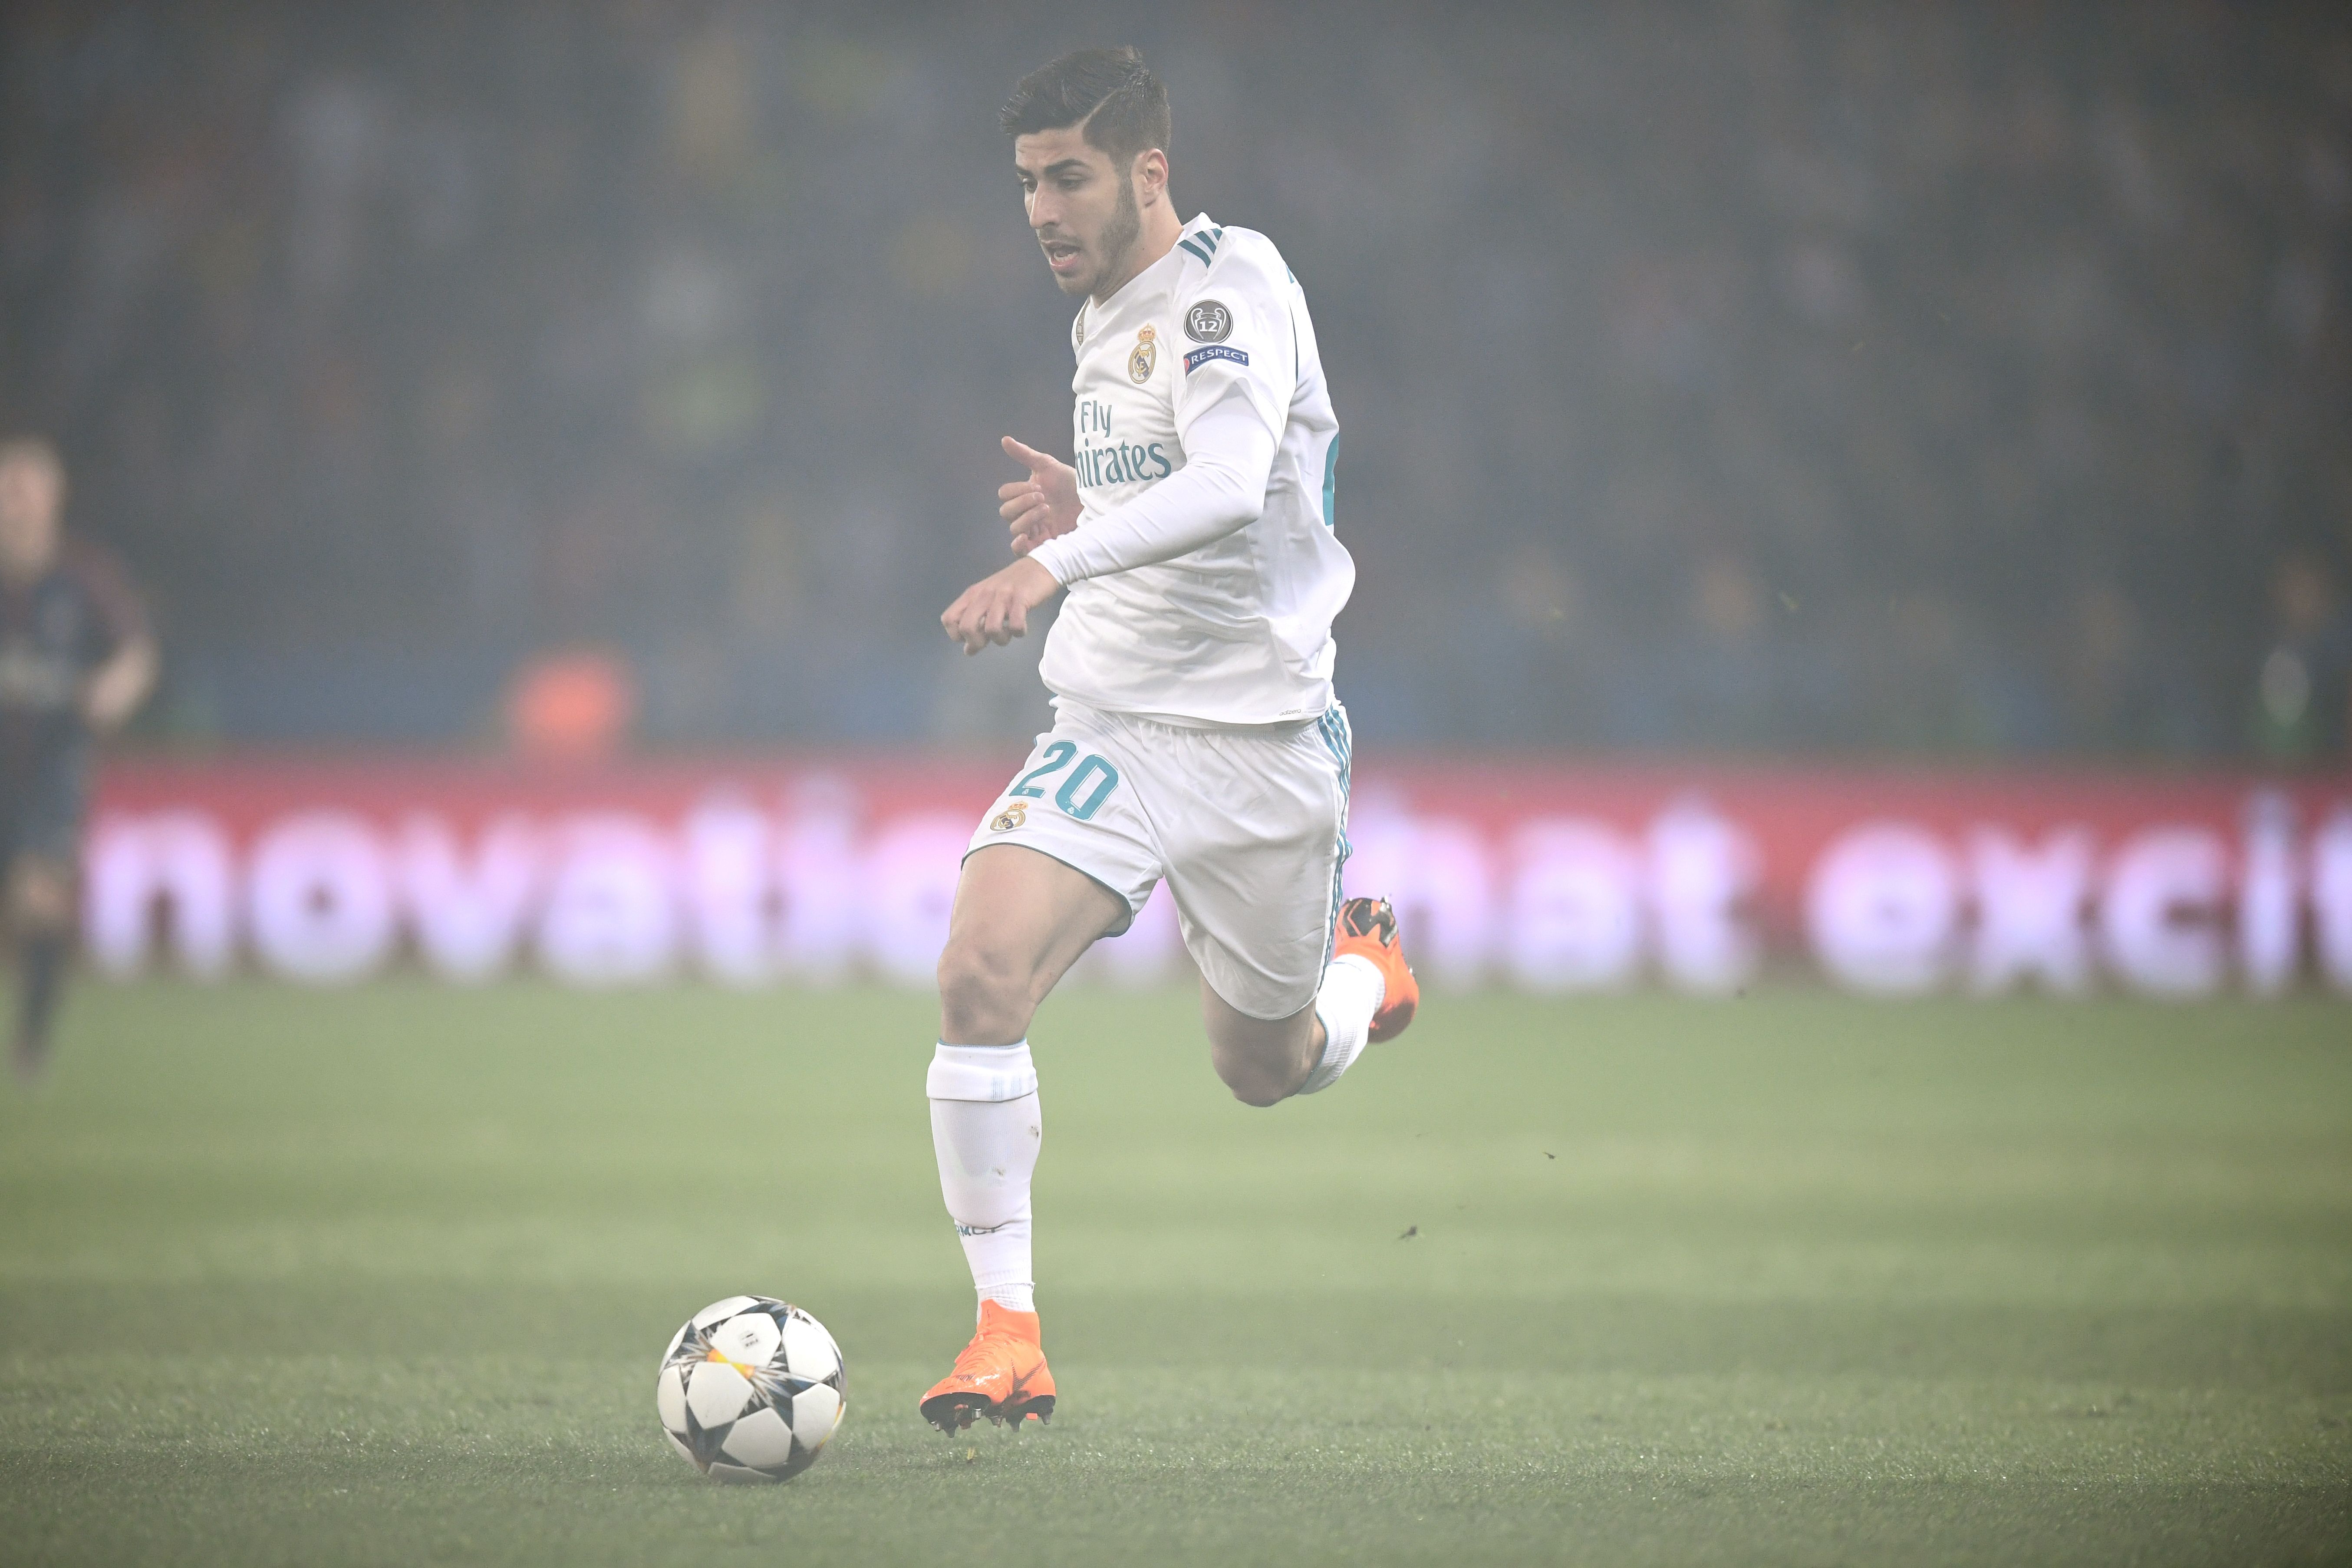 Real Madrid's Spanish midfielder Marco Asensio runs with the ball during the UEFA Champions League round of 16 second leg football match between Paris Saint-Germain (PSG) and Real Madrid on March 6, 2018, at the Parc des Princes stadium in Paris. / AFP PHOTO / FRANCK FIFE        (Photo credit should read FRANCK FIFE/AFP/Getty Images)